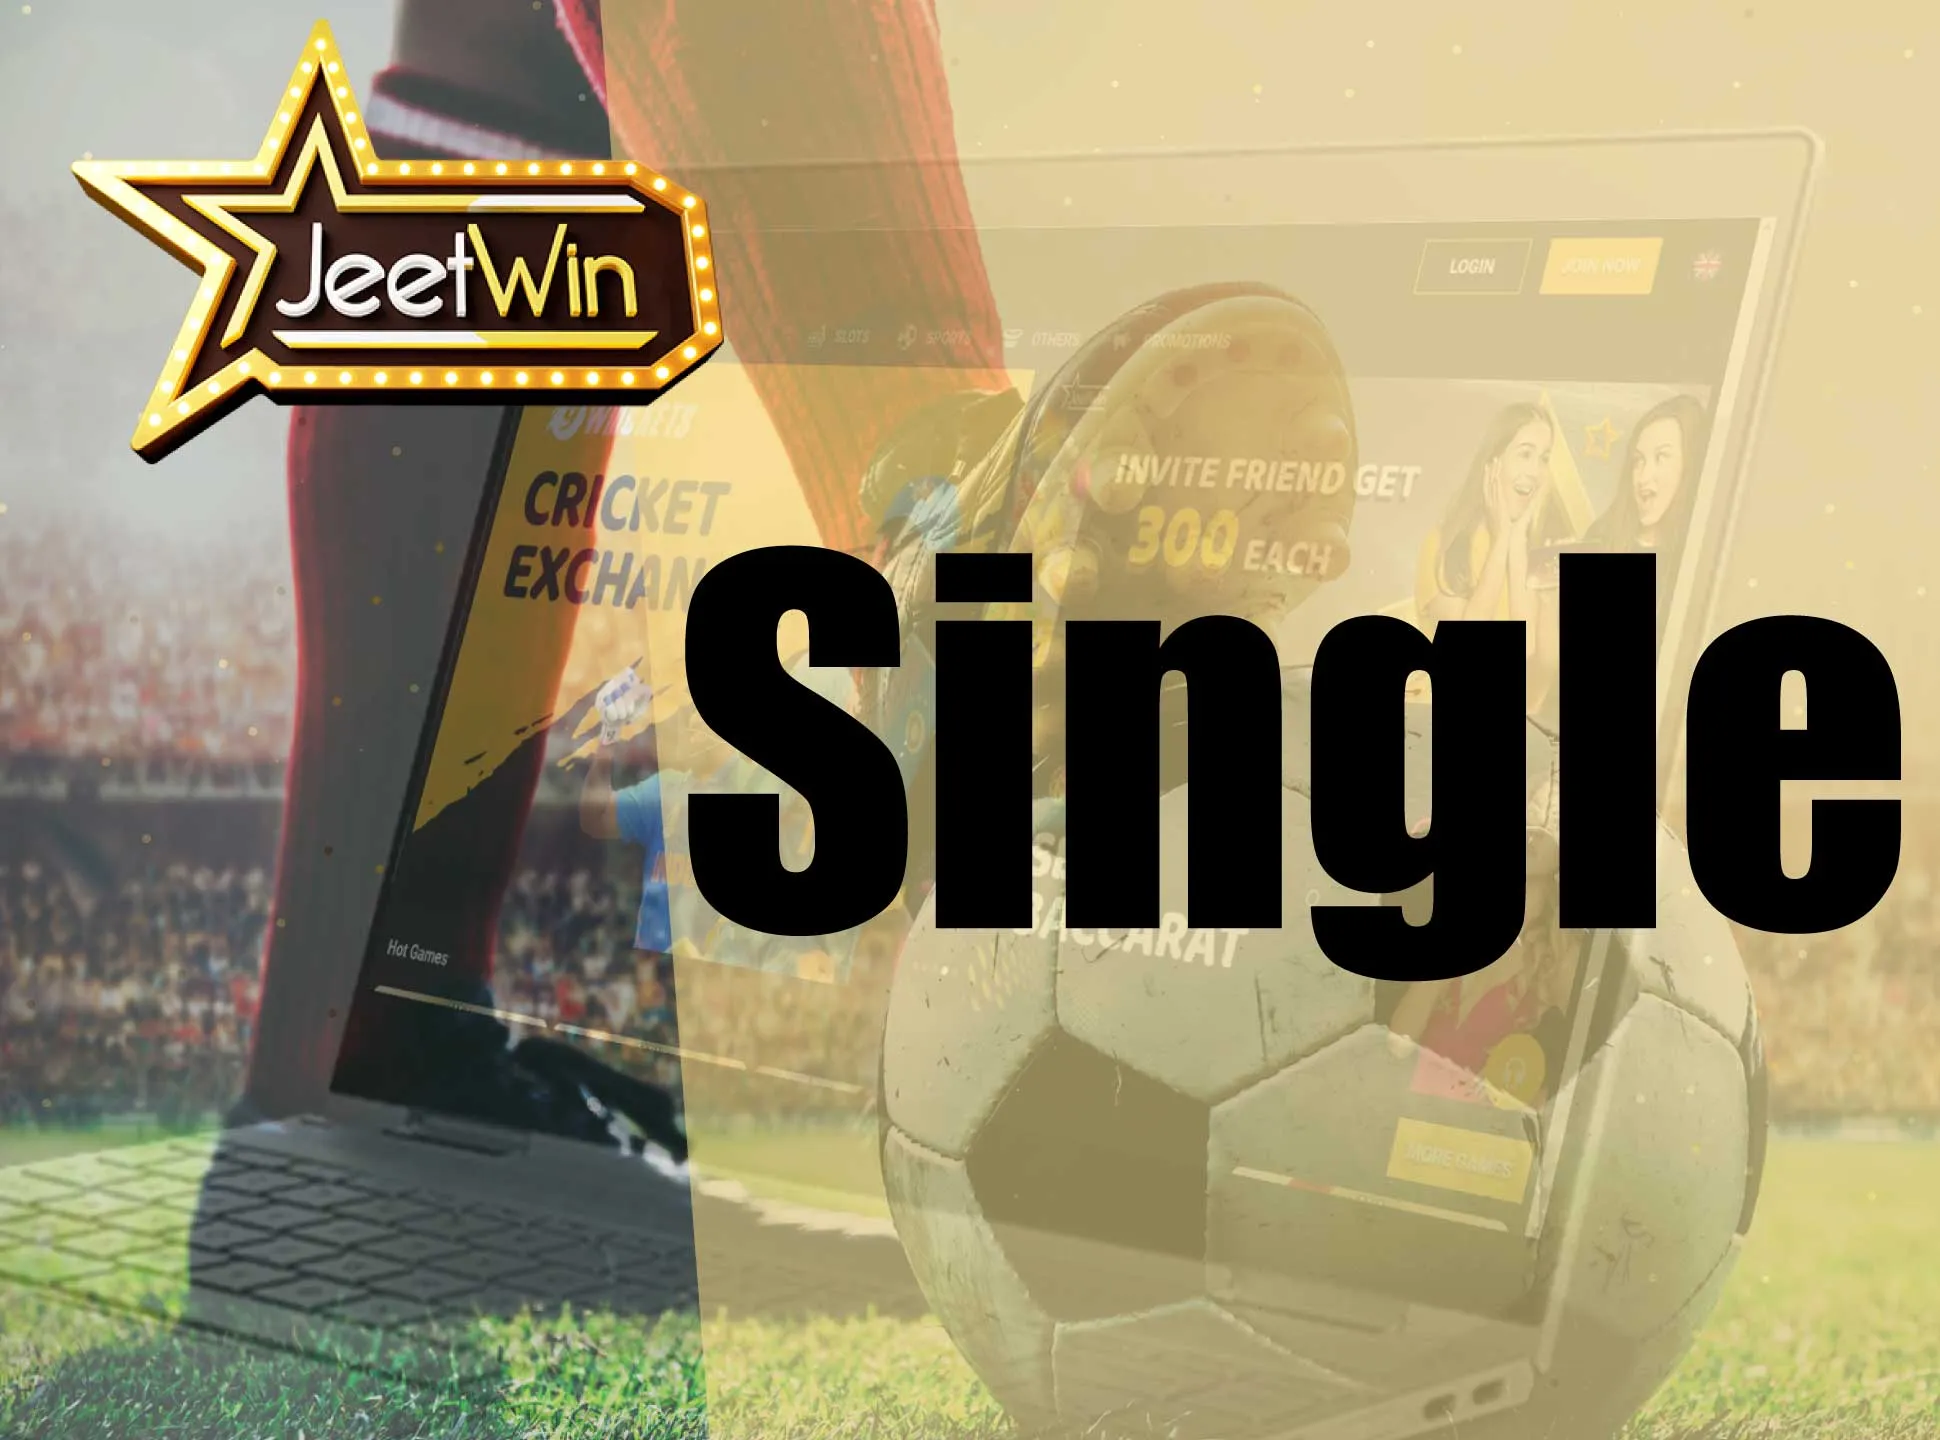 Single bets are easier for those who are new to betting.